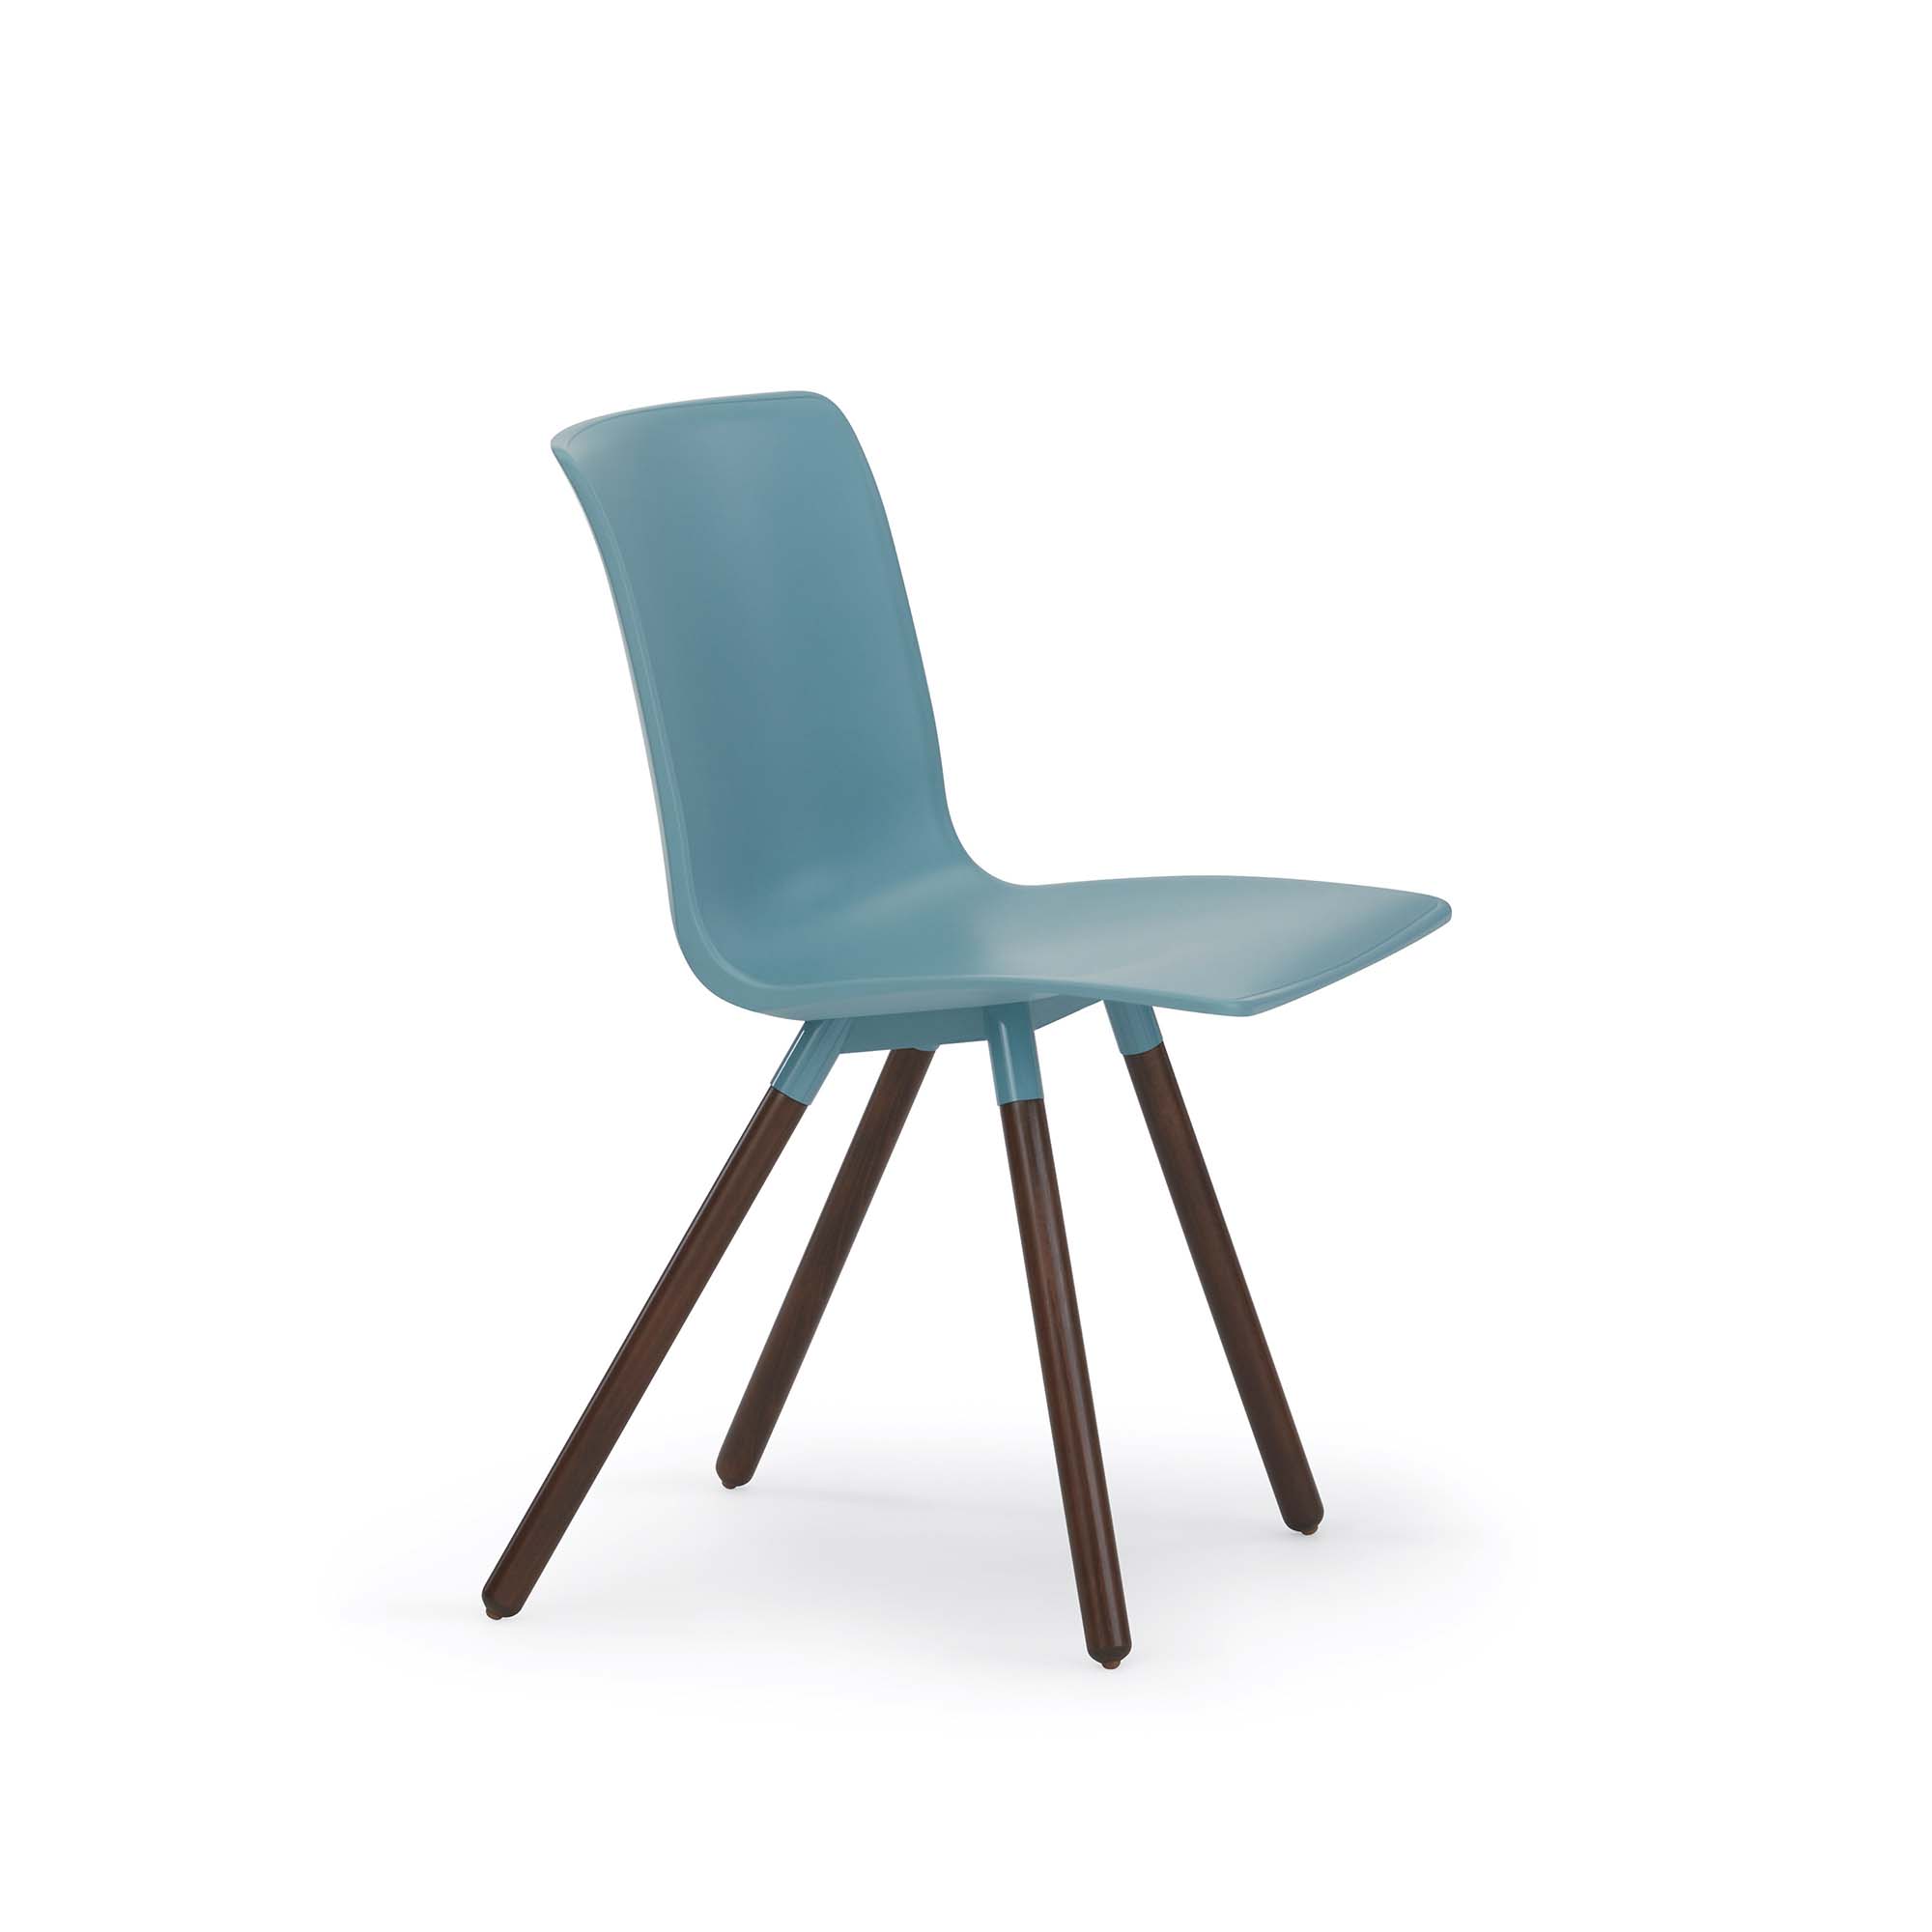 Kitsy Guest Chair, Wood Legs